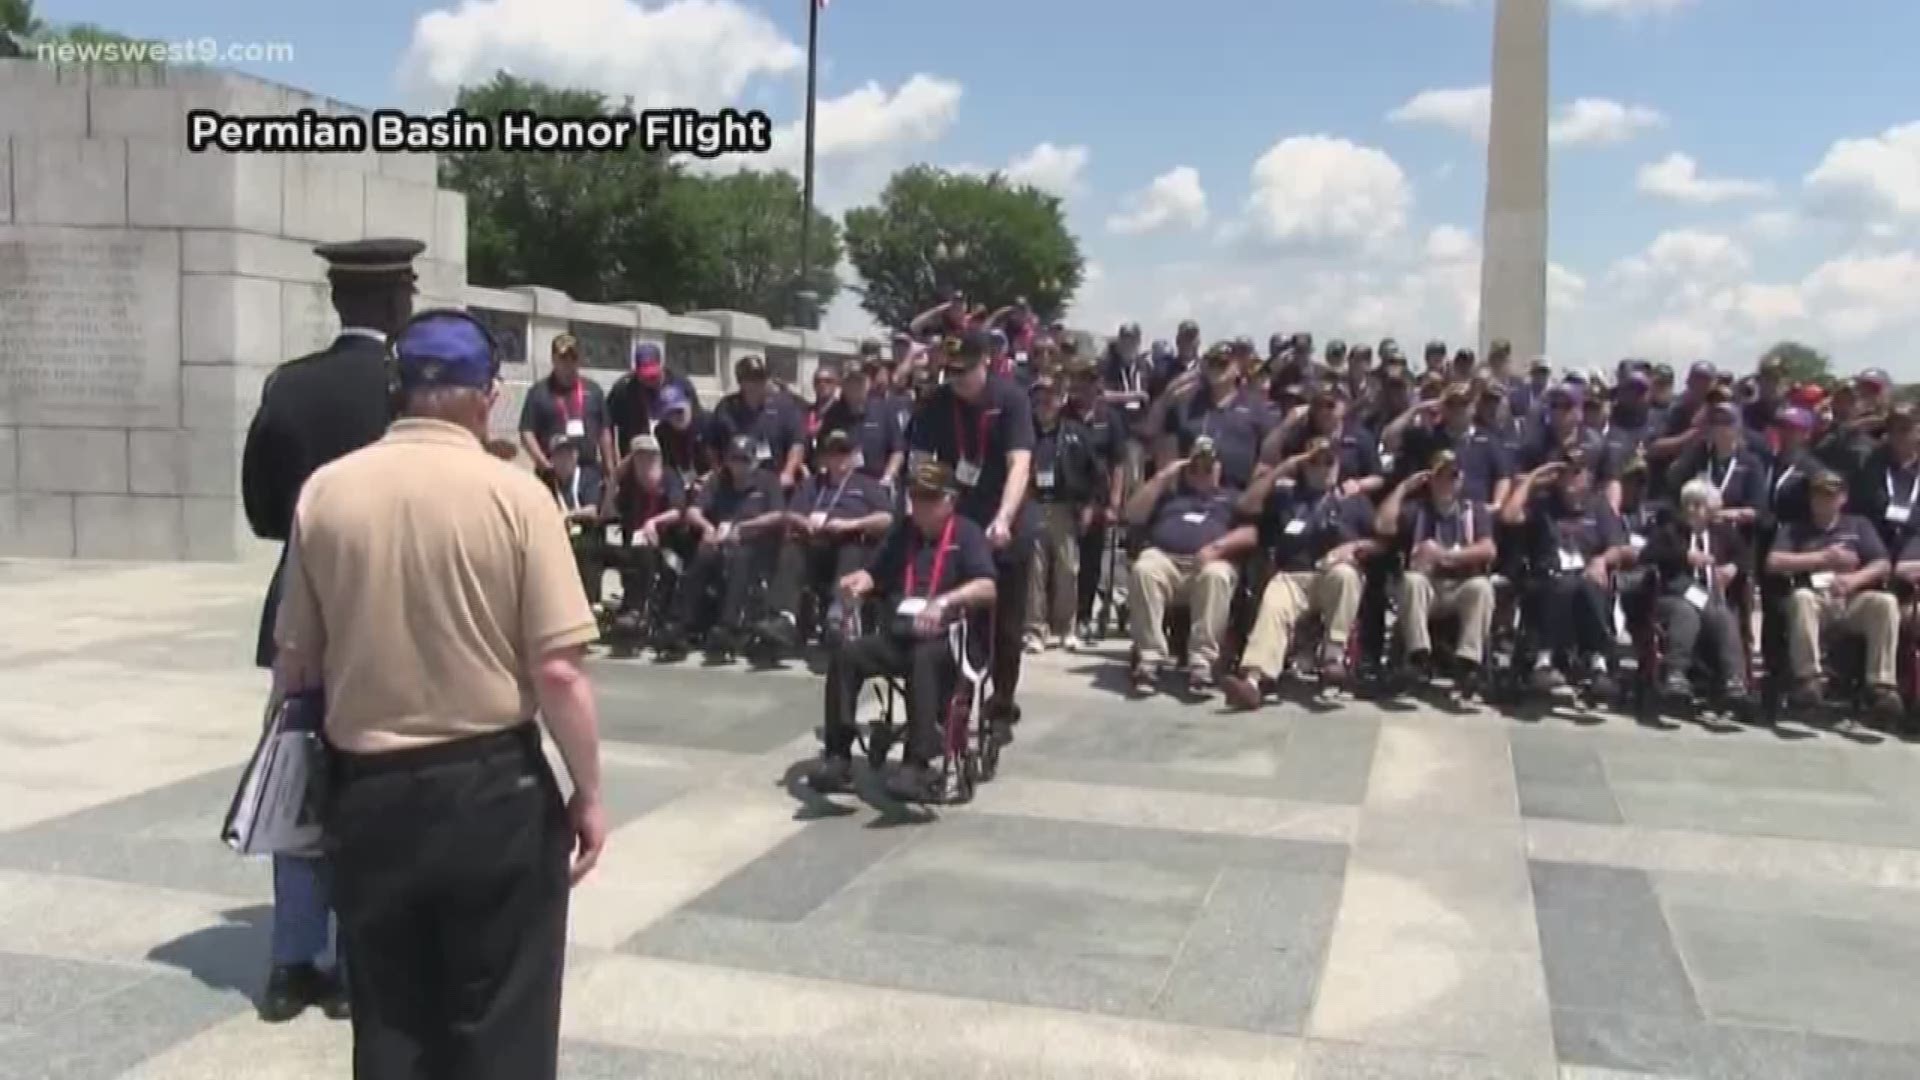 The non-profit sends local veterans to Washington, D.C. to see the memorials.